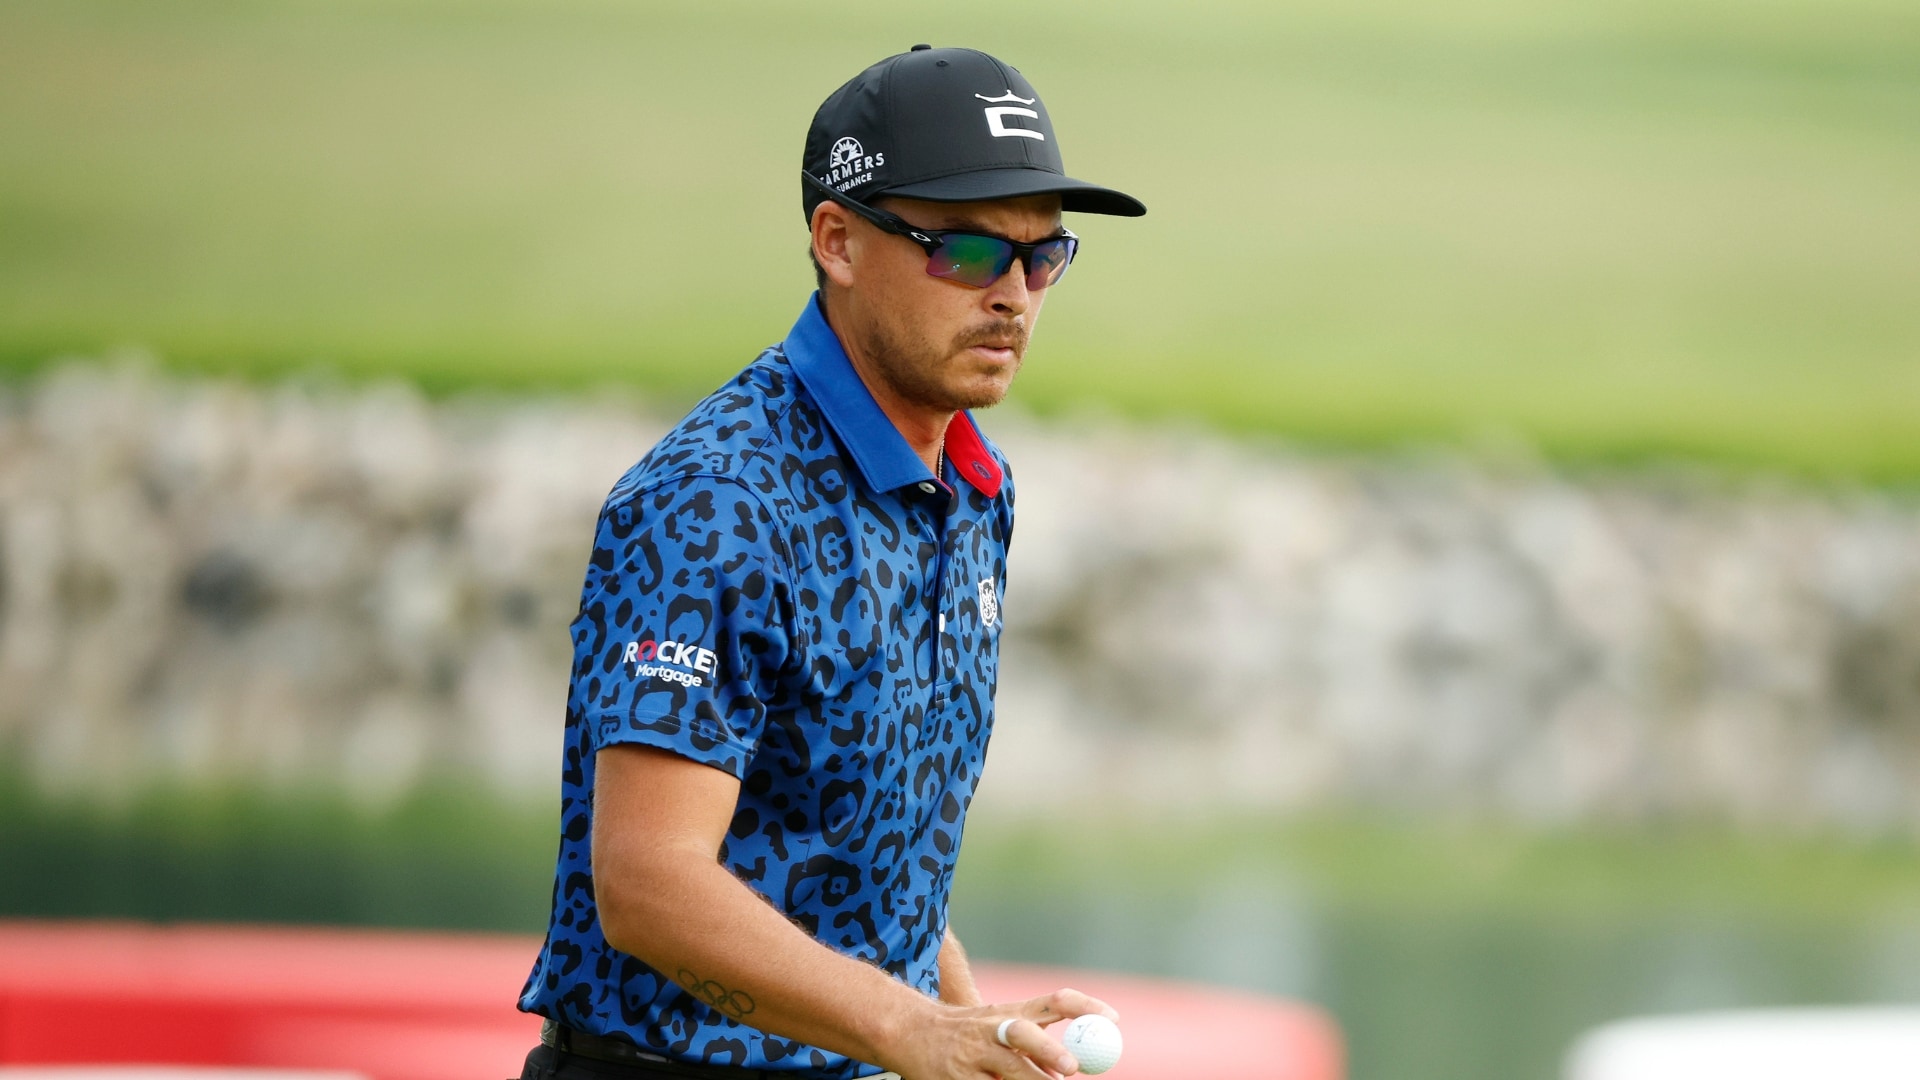 ‘I’m not scared to fail’: Rickie Fowler leads Rocket Mortgage at 20 under in bid to end drought